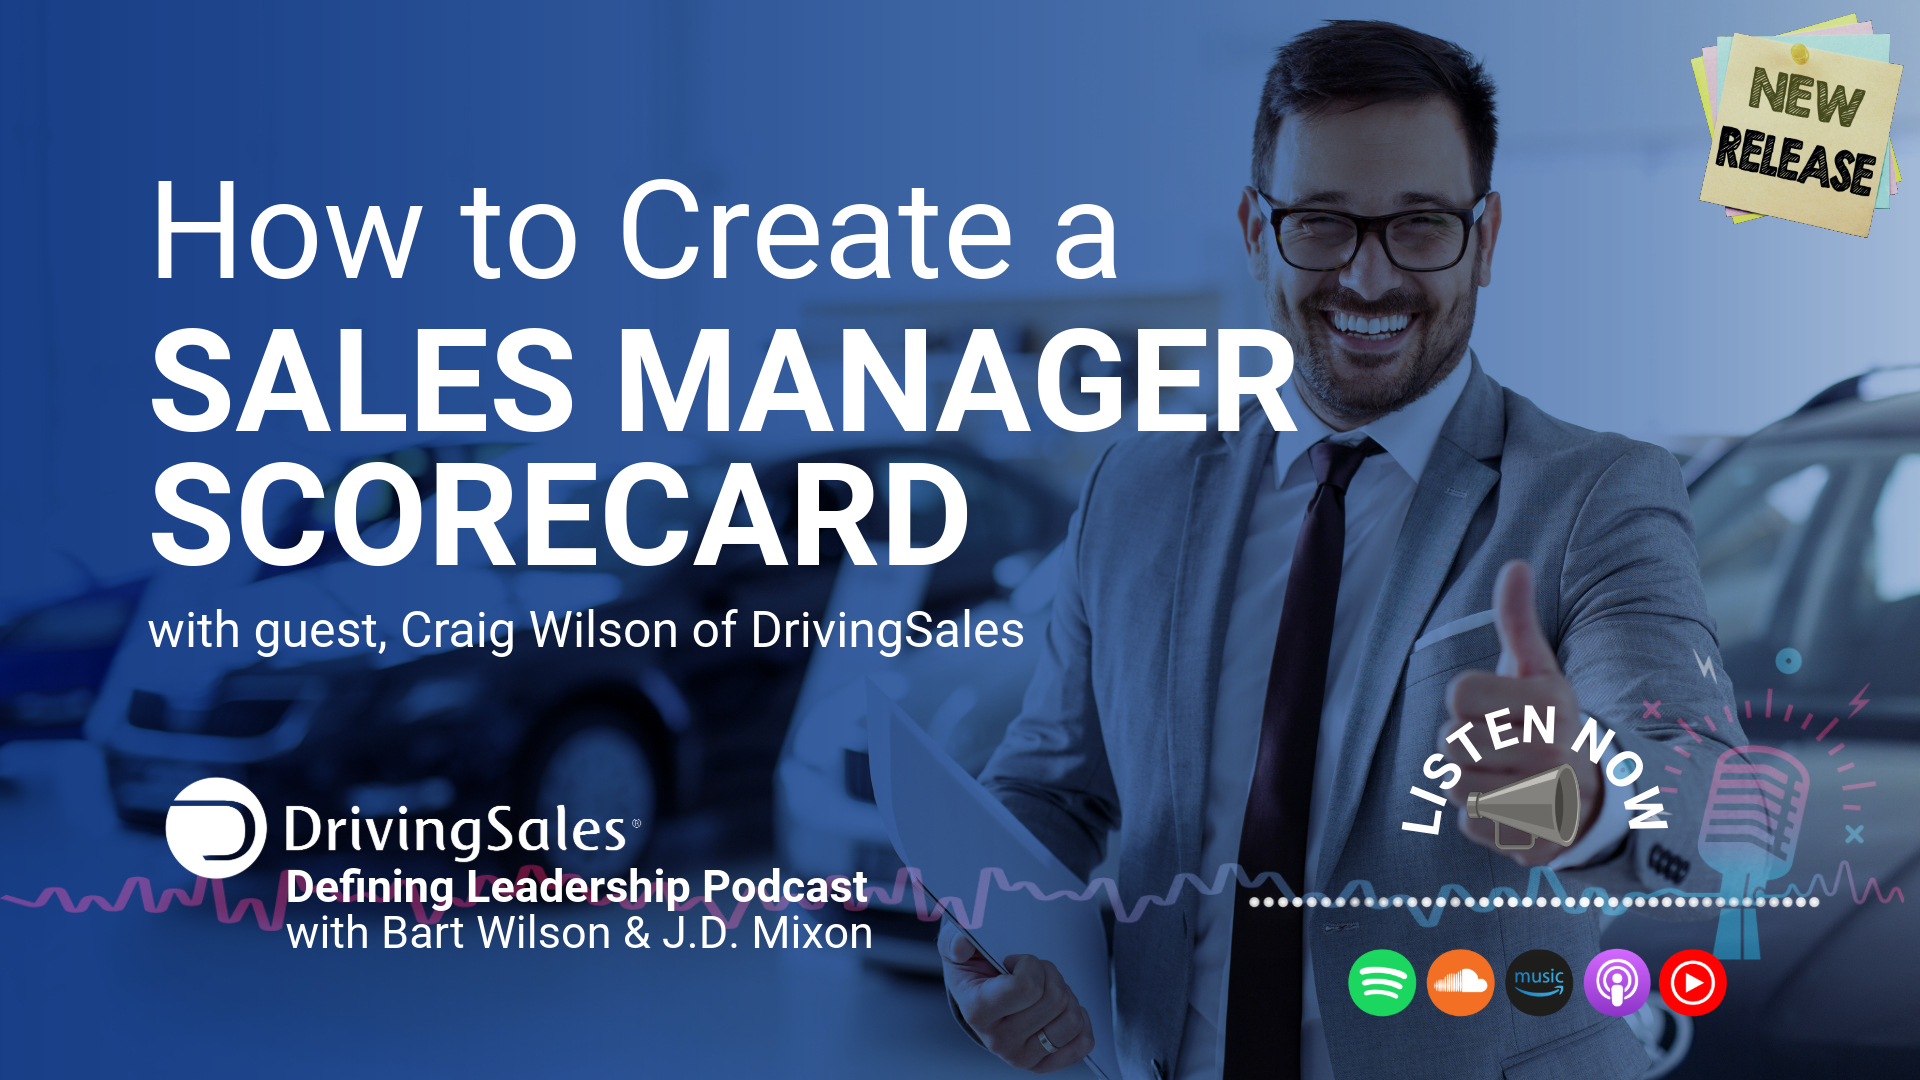 The image features a promotional graphic for a podcast episode titled "How to Create a Sales Manager Scorecard." In the foreground, a smiling man in a business suit stands confidently in a car dealership, with cars blurred in the background. Text on the image announces the episode, mentioning it features guest Craig Wilson of DrivingSales. Logos of podcast platforms like Spotify and Apple Music are included, along with a call to action urging viewers to "Listen Now." The overall design highlights a professional and engaging look for the podcast "DrivingSales Defining Leadership Podcast" with hosts Bart Wilson and J.D. Mixon.